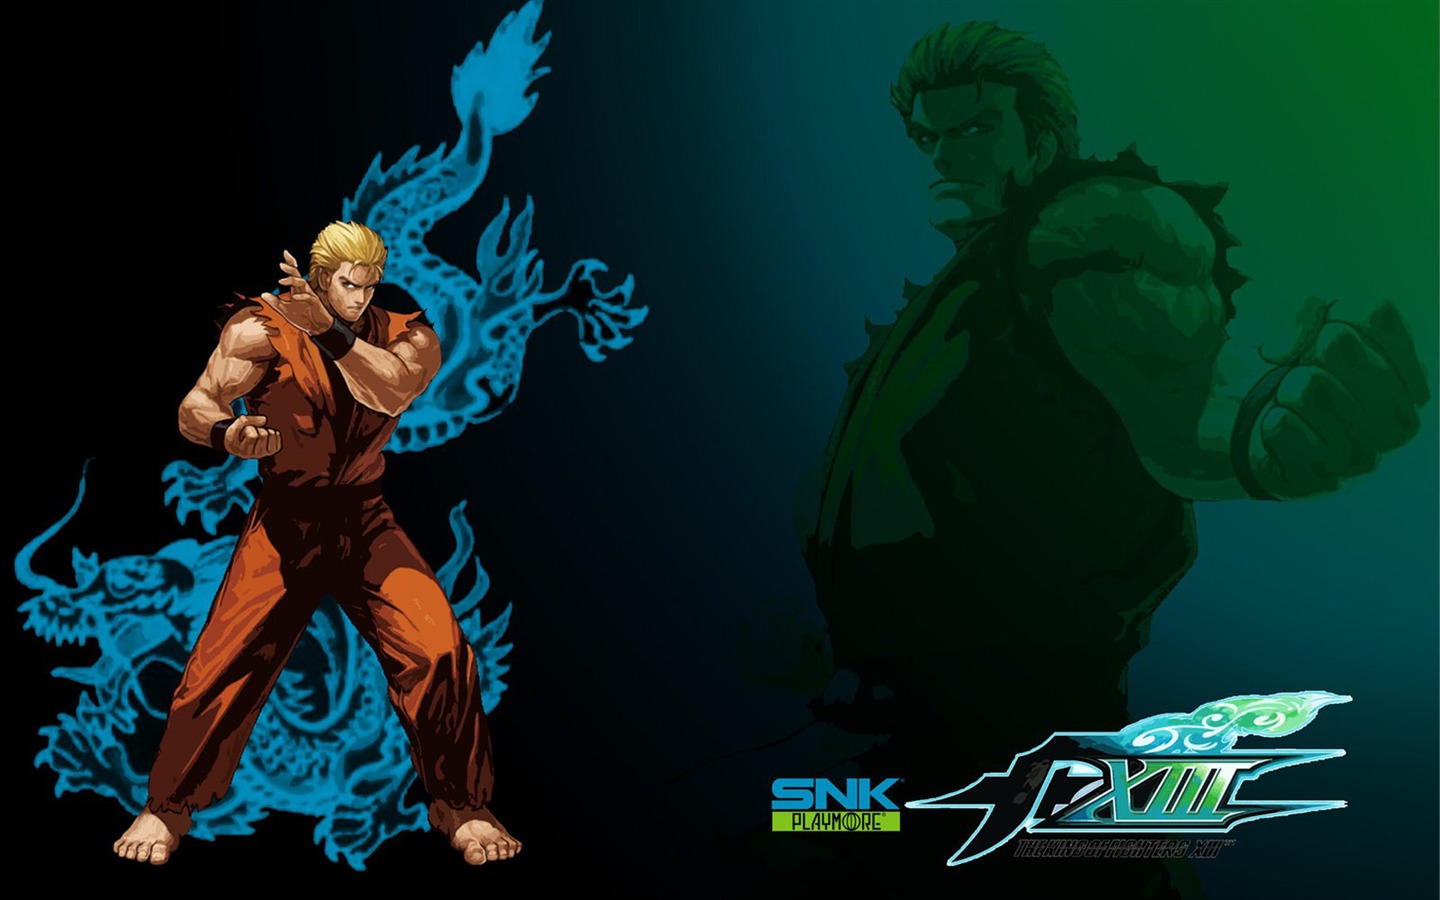 Le roi de wallpapers Fighters XIII #2 - 1440x900